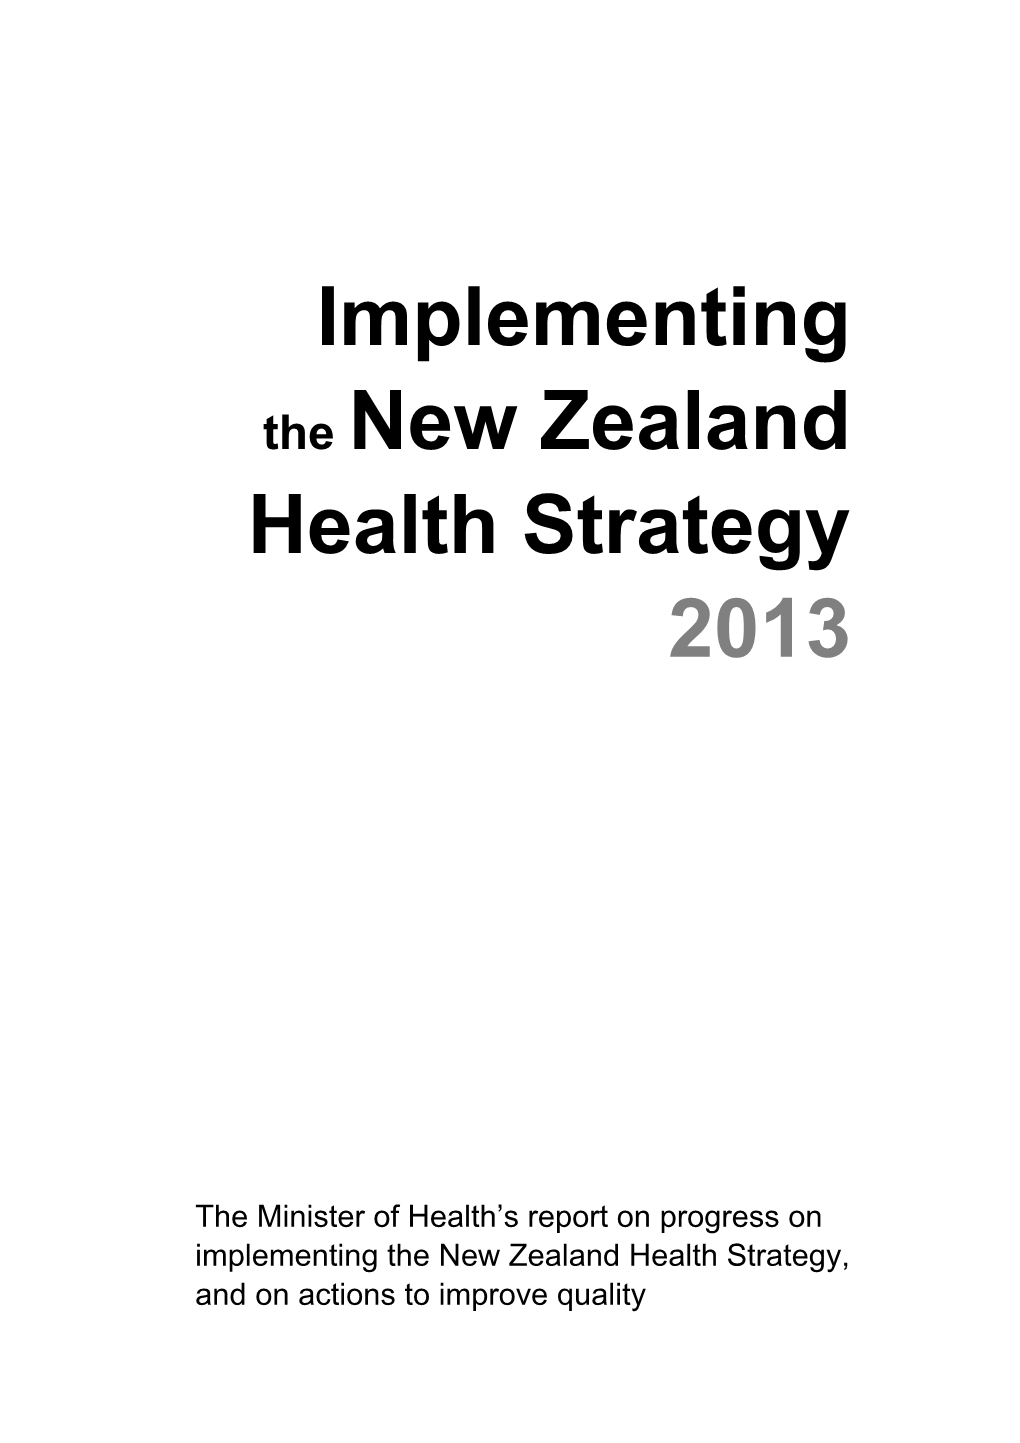 Implementing the New Zealand Health Strategy 2013